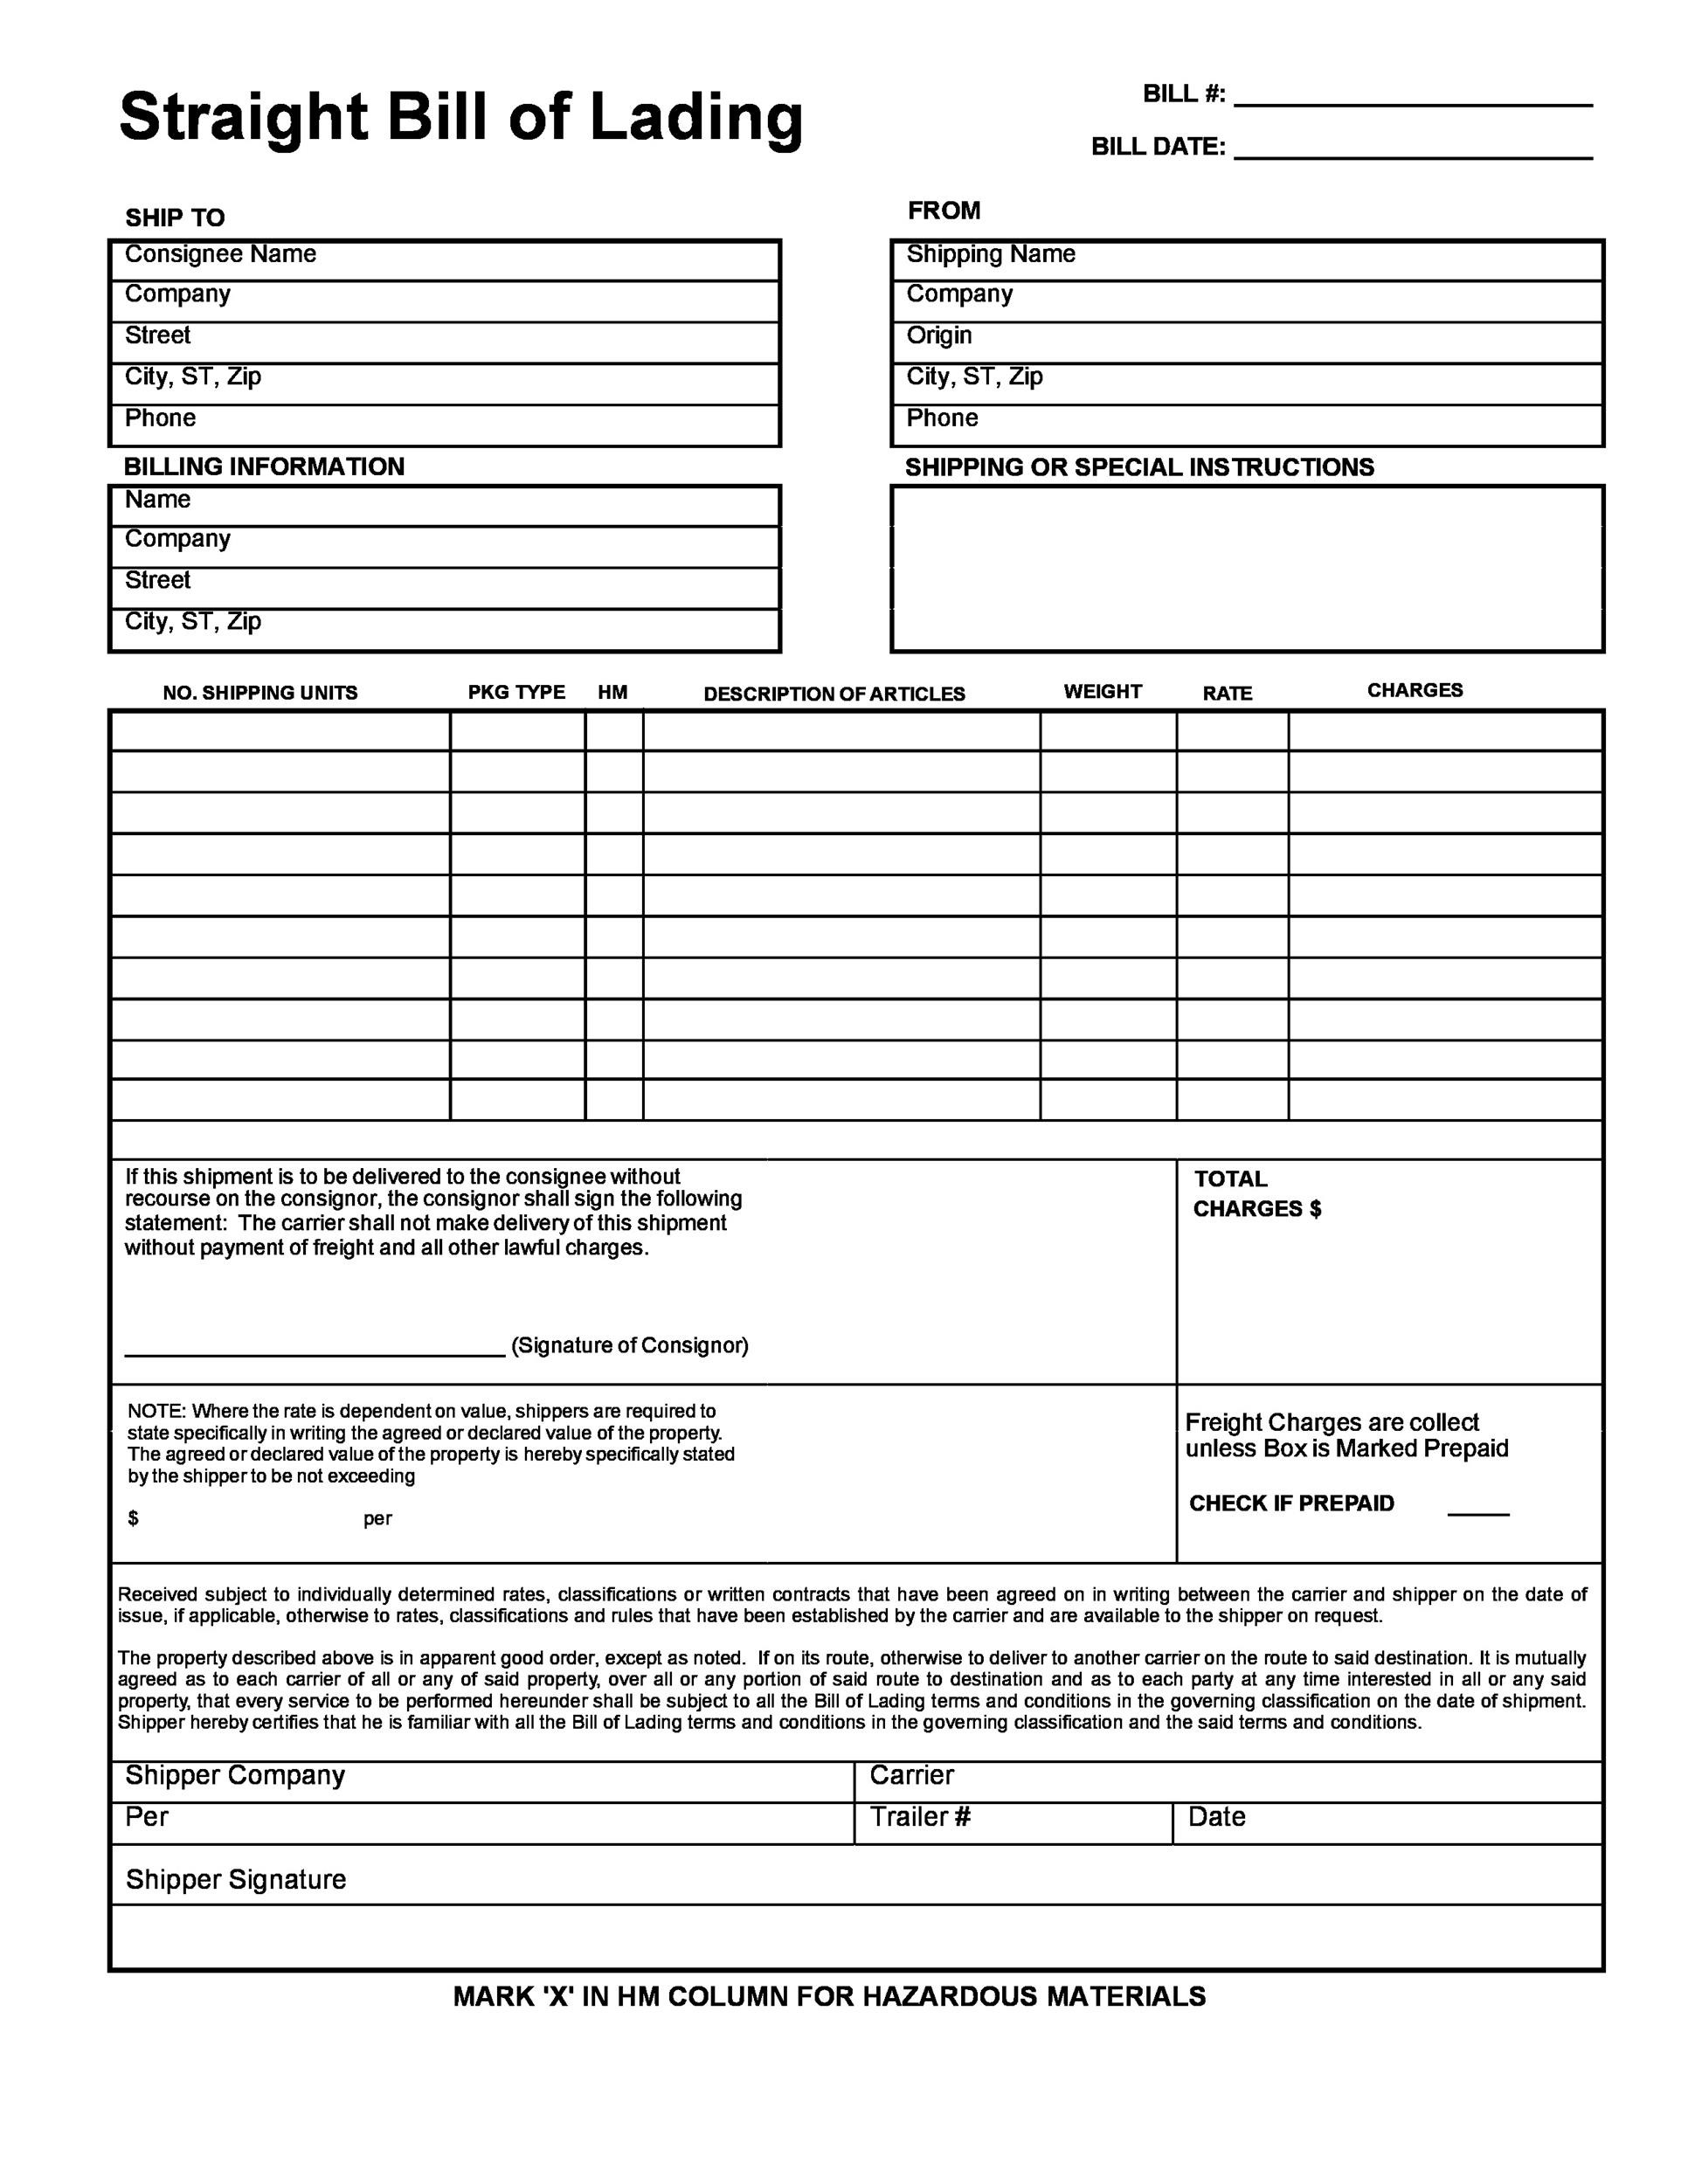 freight bill of lading form